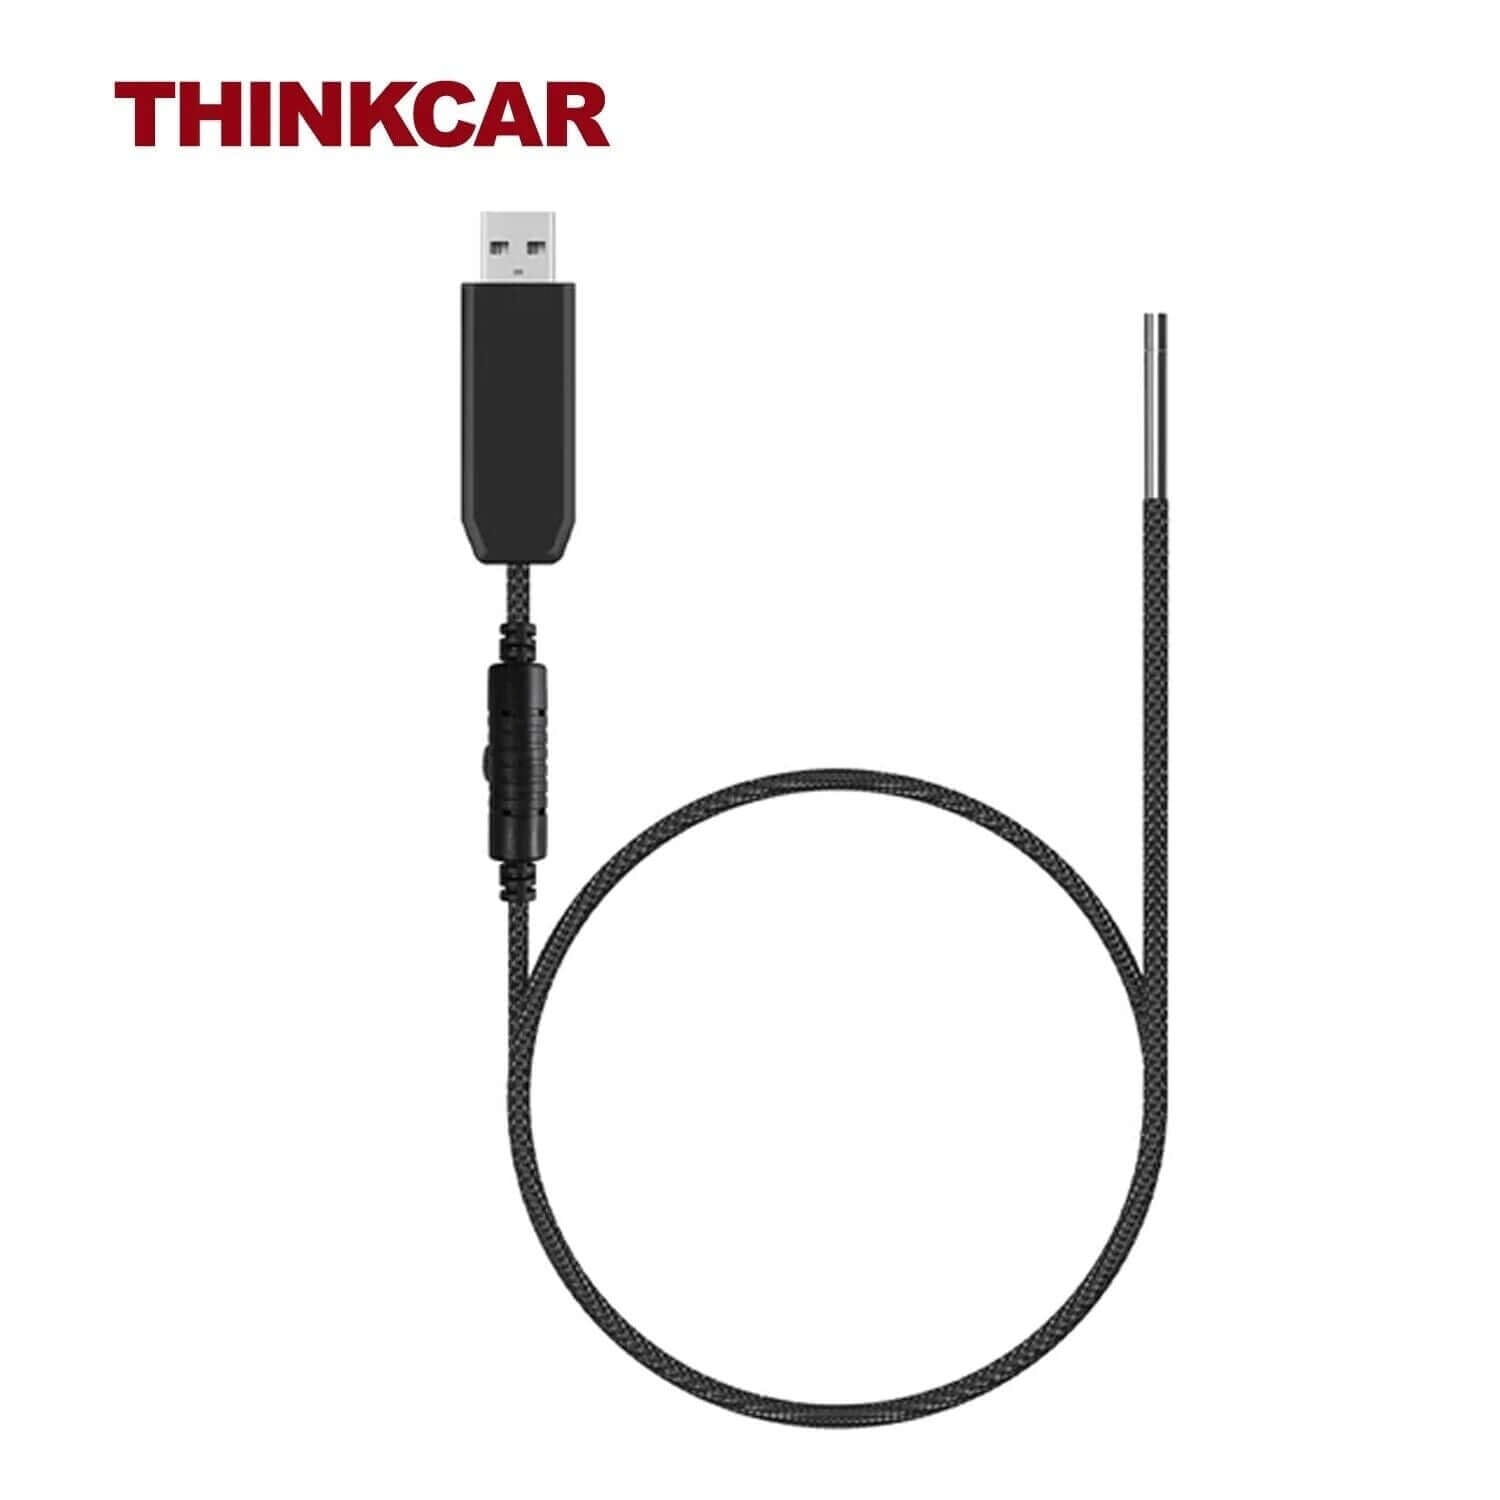 THINKCAR® THINKTOOL Endoscope USB Video Inspection Scope Camera with LED Light for Automotive Diagnostic Equipment 60 inch